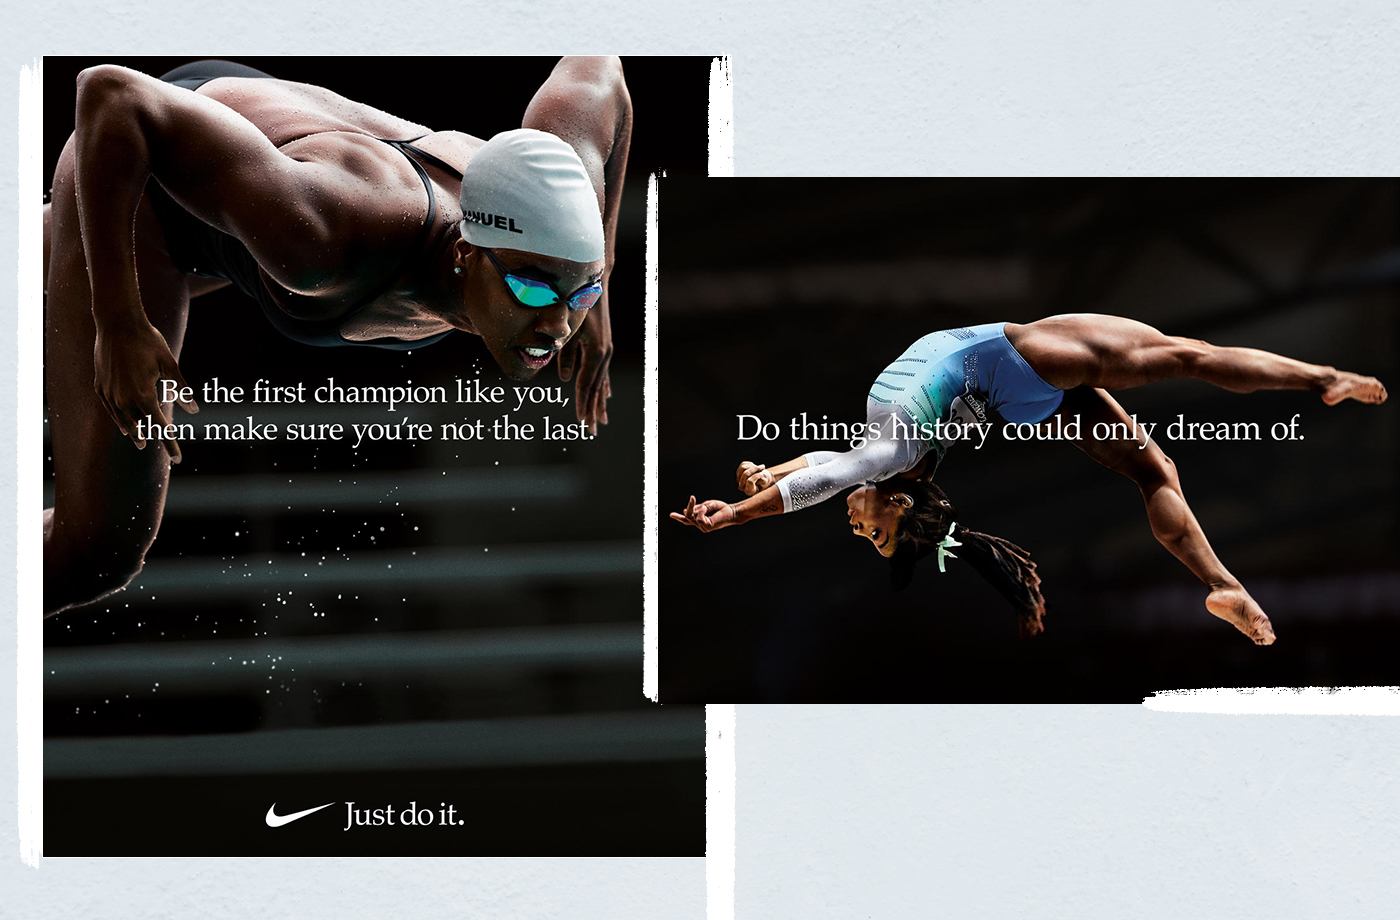 The Nike Dream Crazier ad has an all 